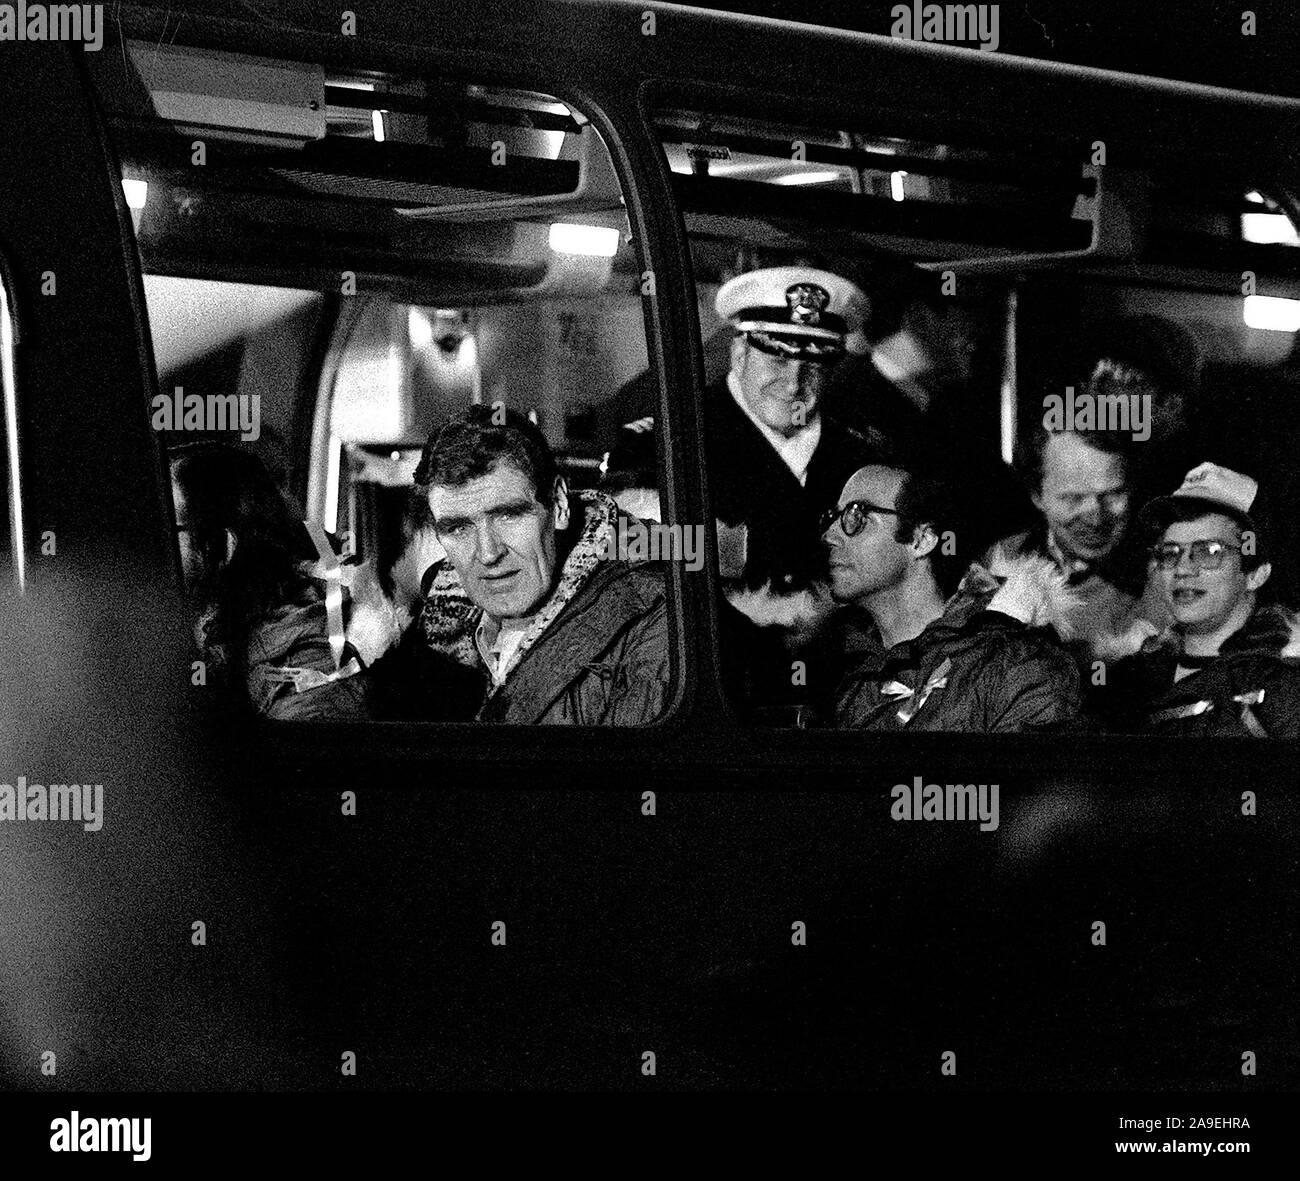 52 hostages Black and White Stock Photos & Images - Alamy